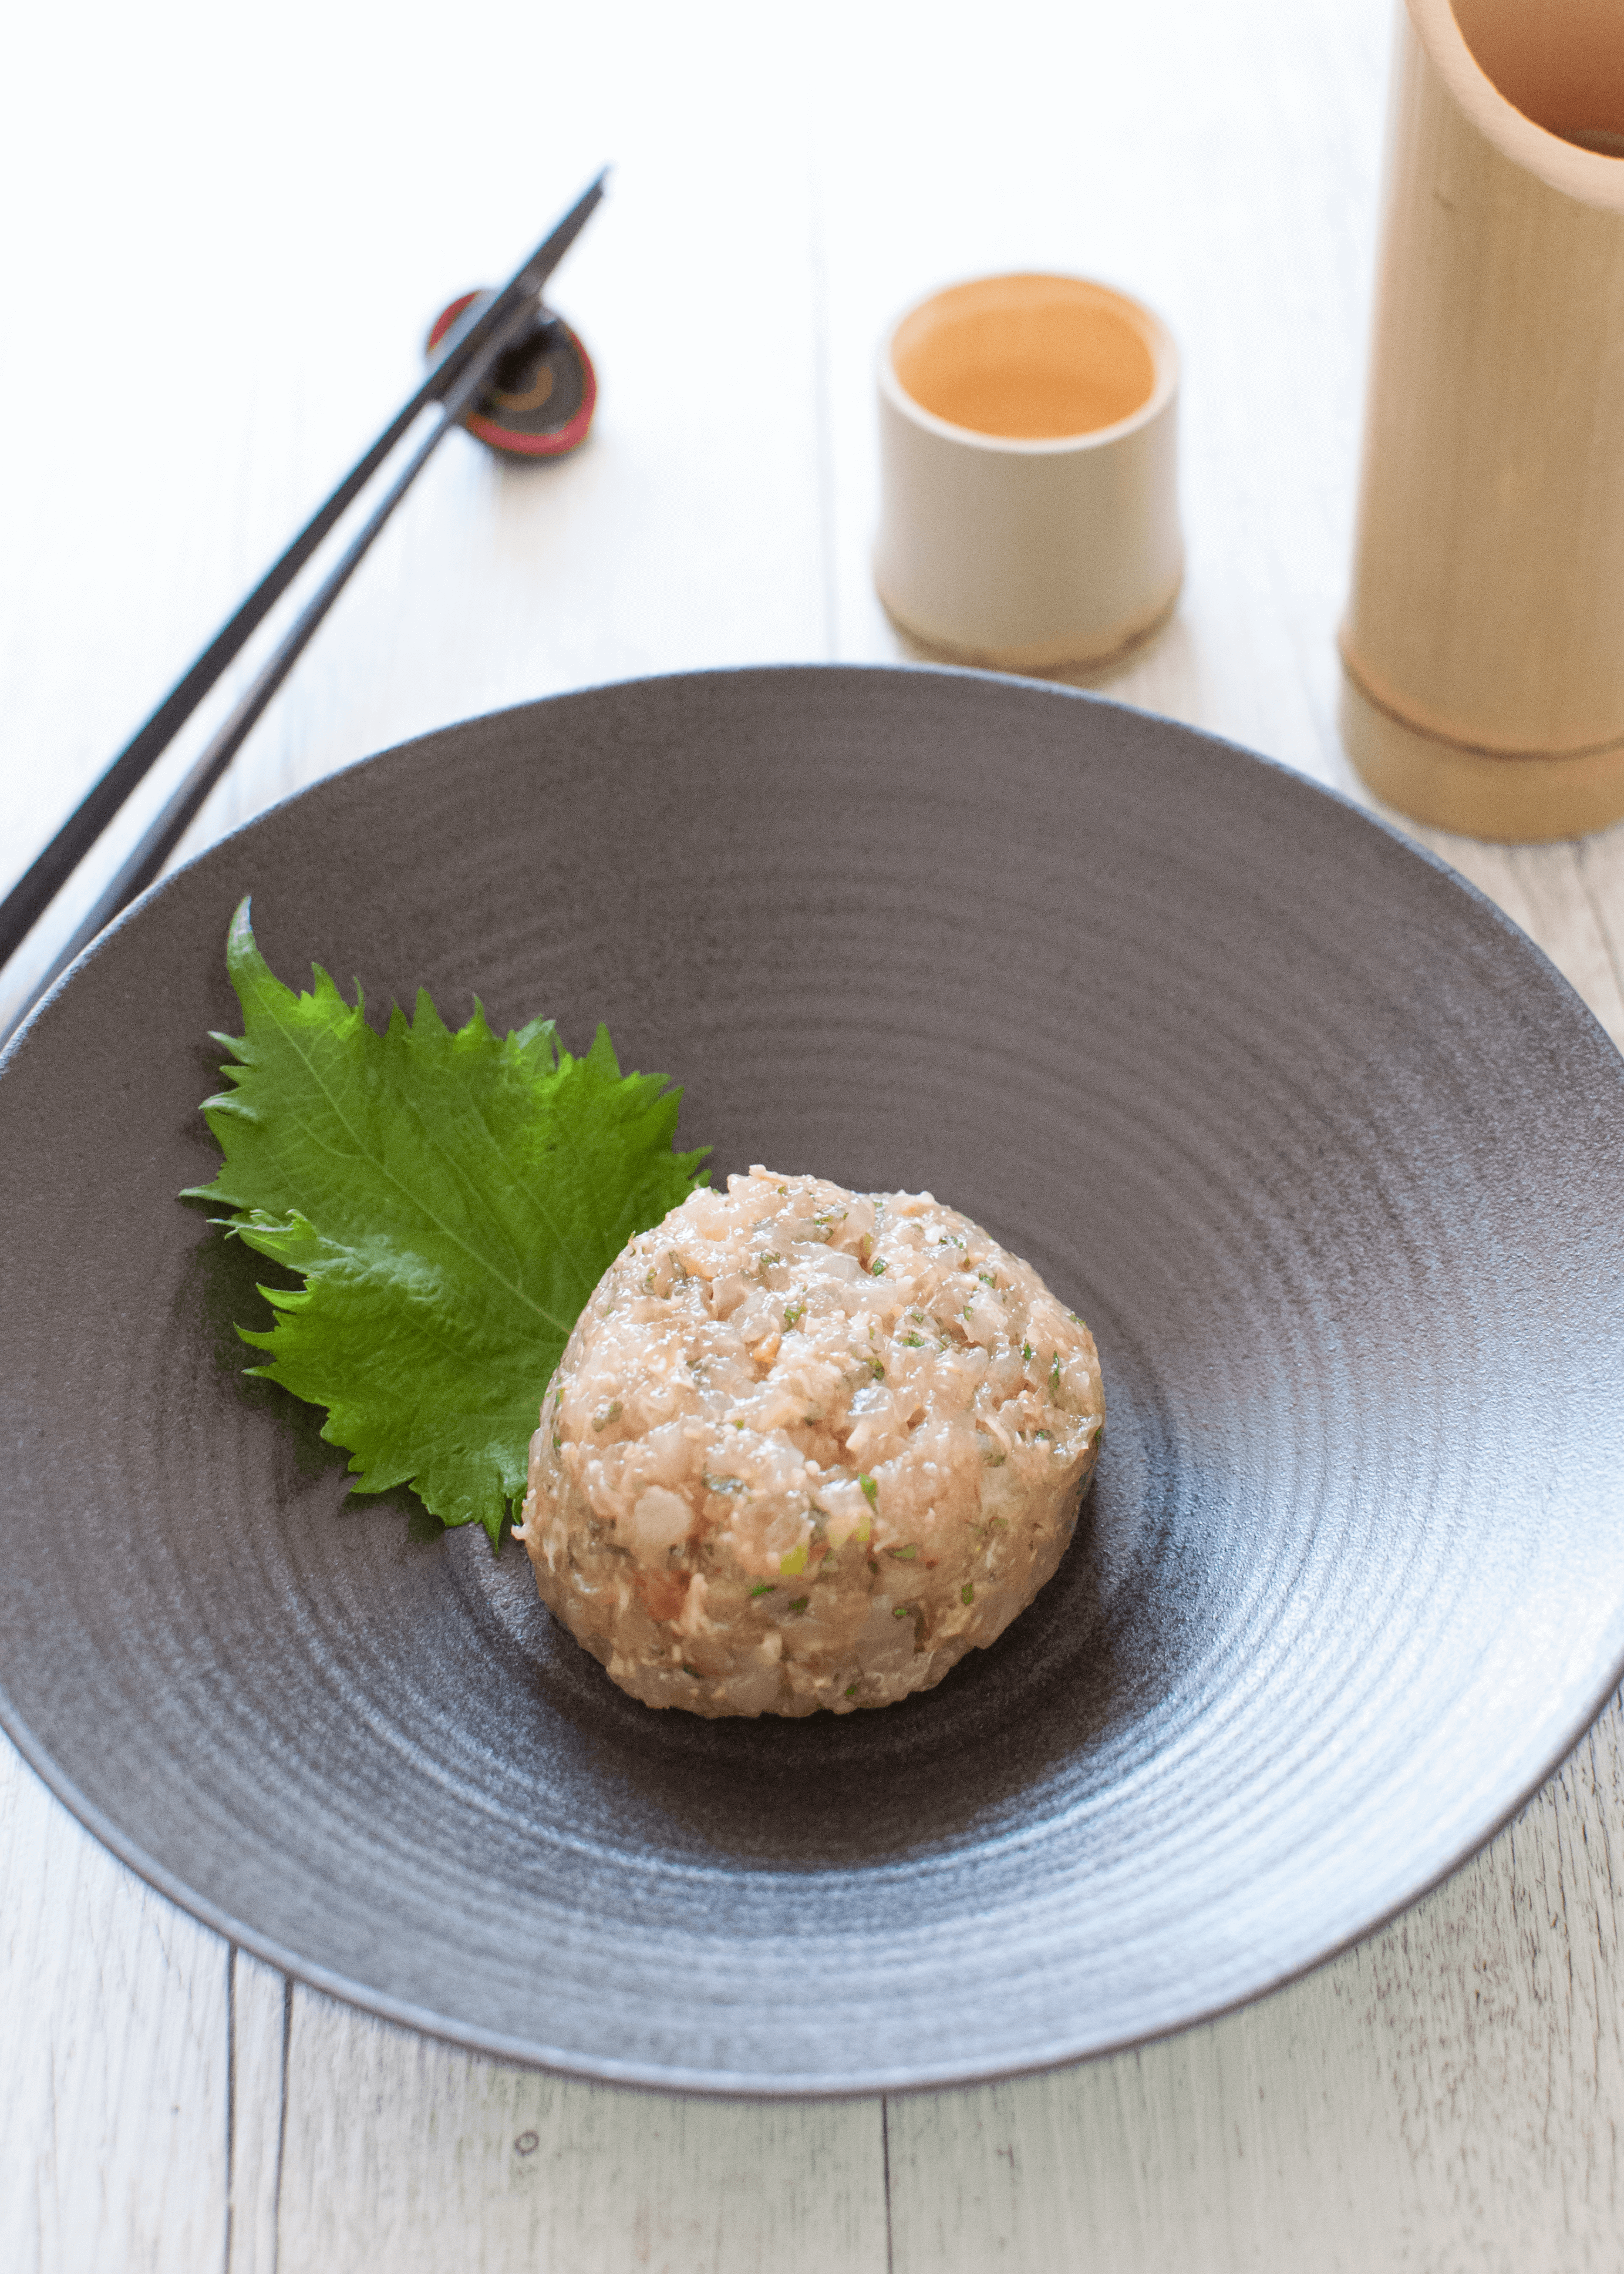 Japanese-style kingfish tartare, called Kingfish Tataki, is a similar dish to fish tartare but with miso flavour. The fish is chopped much more finely than standard fish tartare. Everything is done on a cutting board with a knife, including mixing the ingredients. 